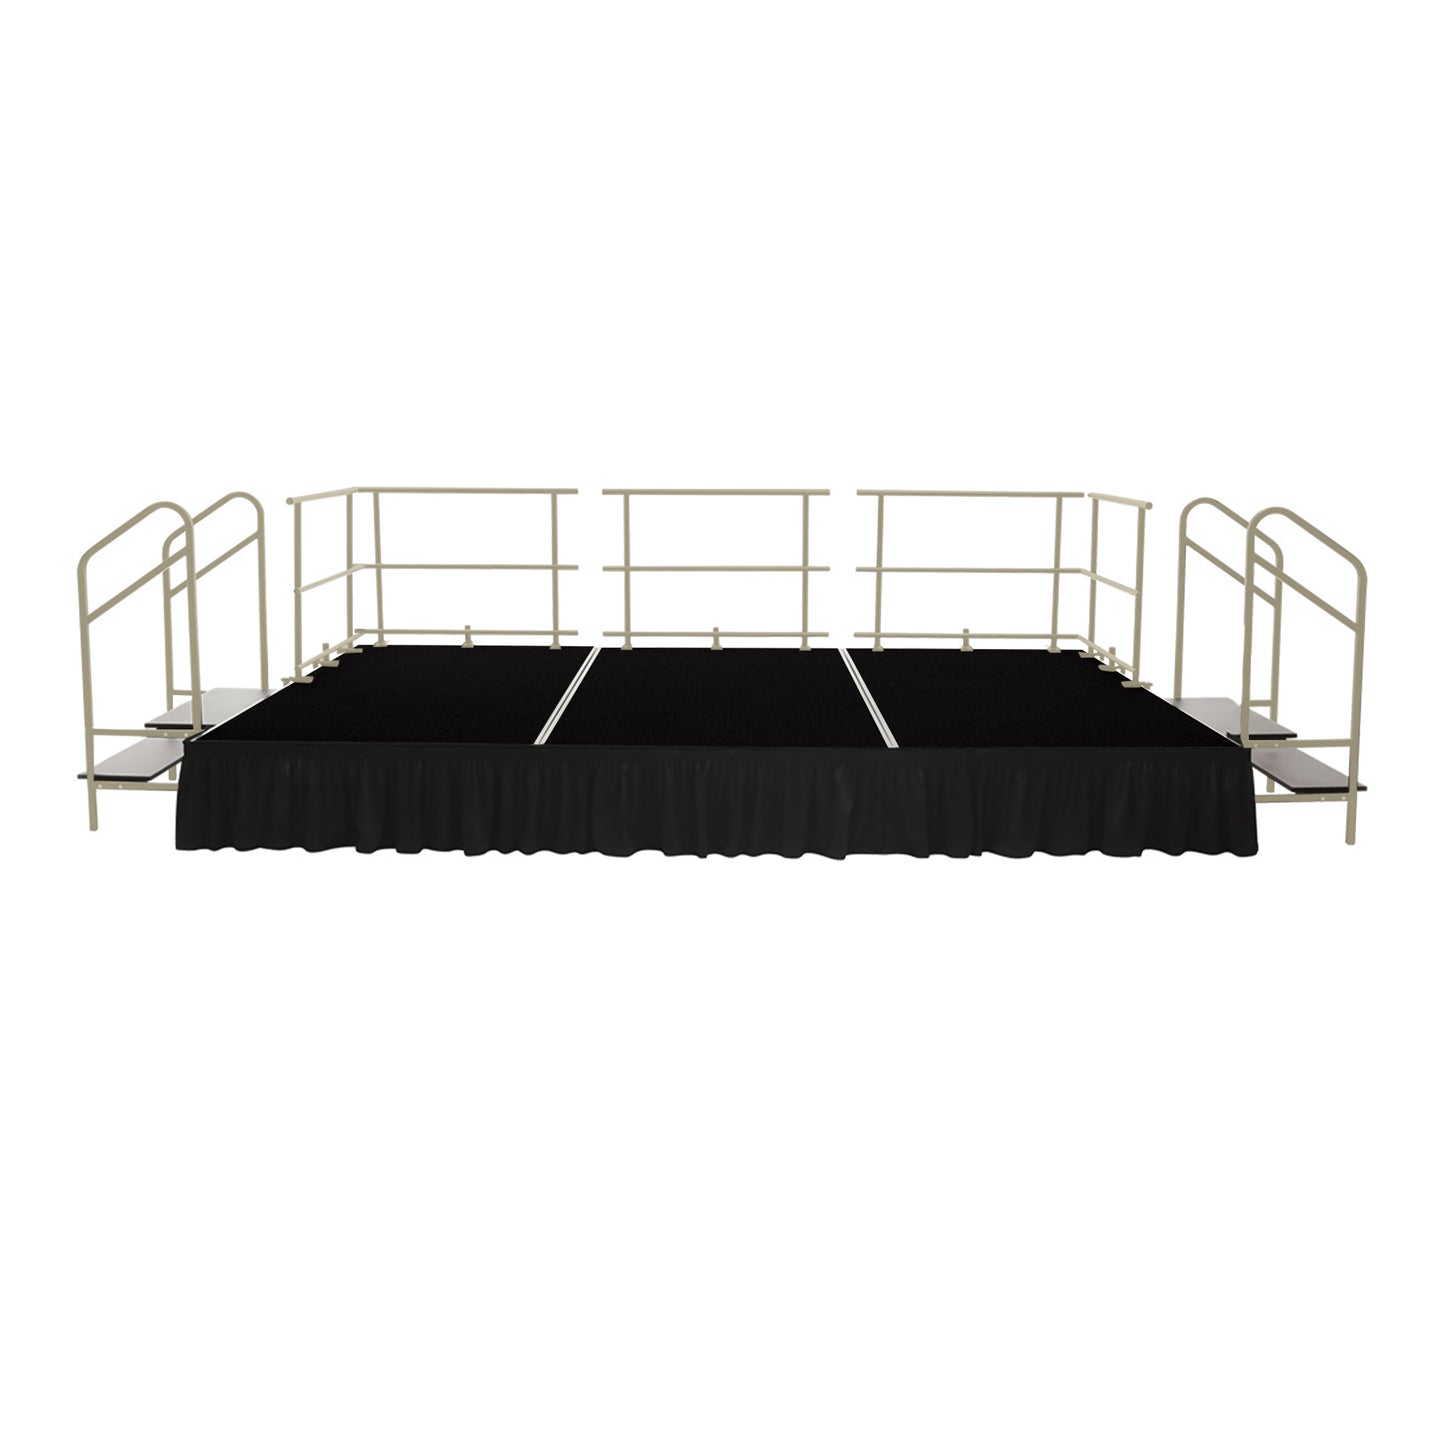 AmTab Fixed Height Stage Set - Polypropylene Top - 16'W x 32'L x 2'H (192"W x 384"L x 24"H)  (AmTab AMT-STS163224P)